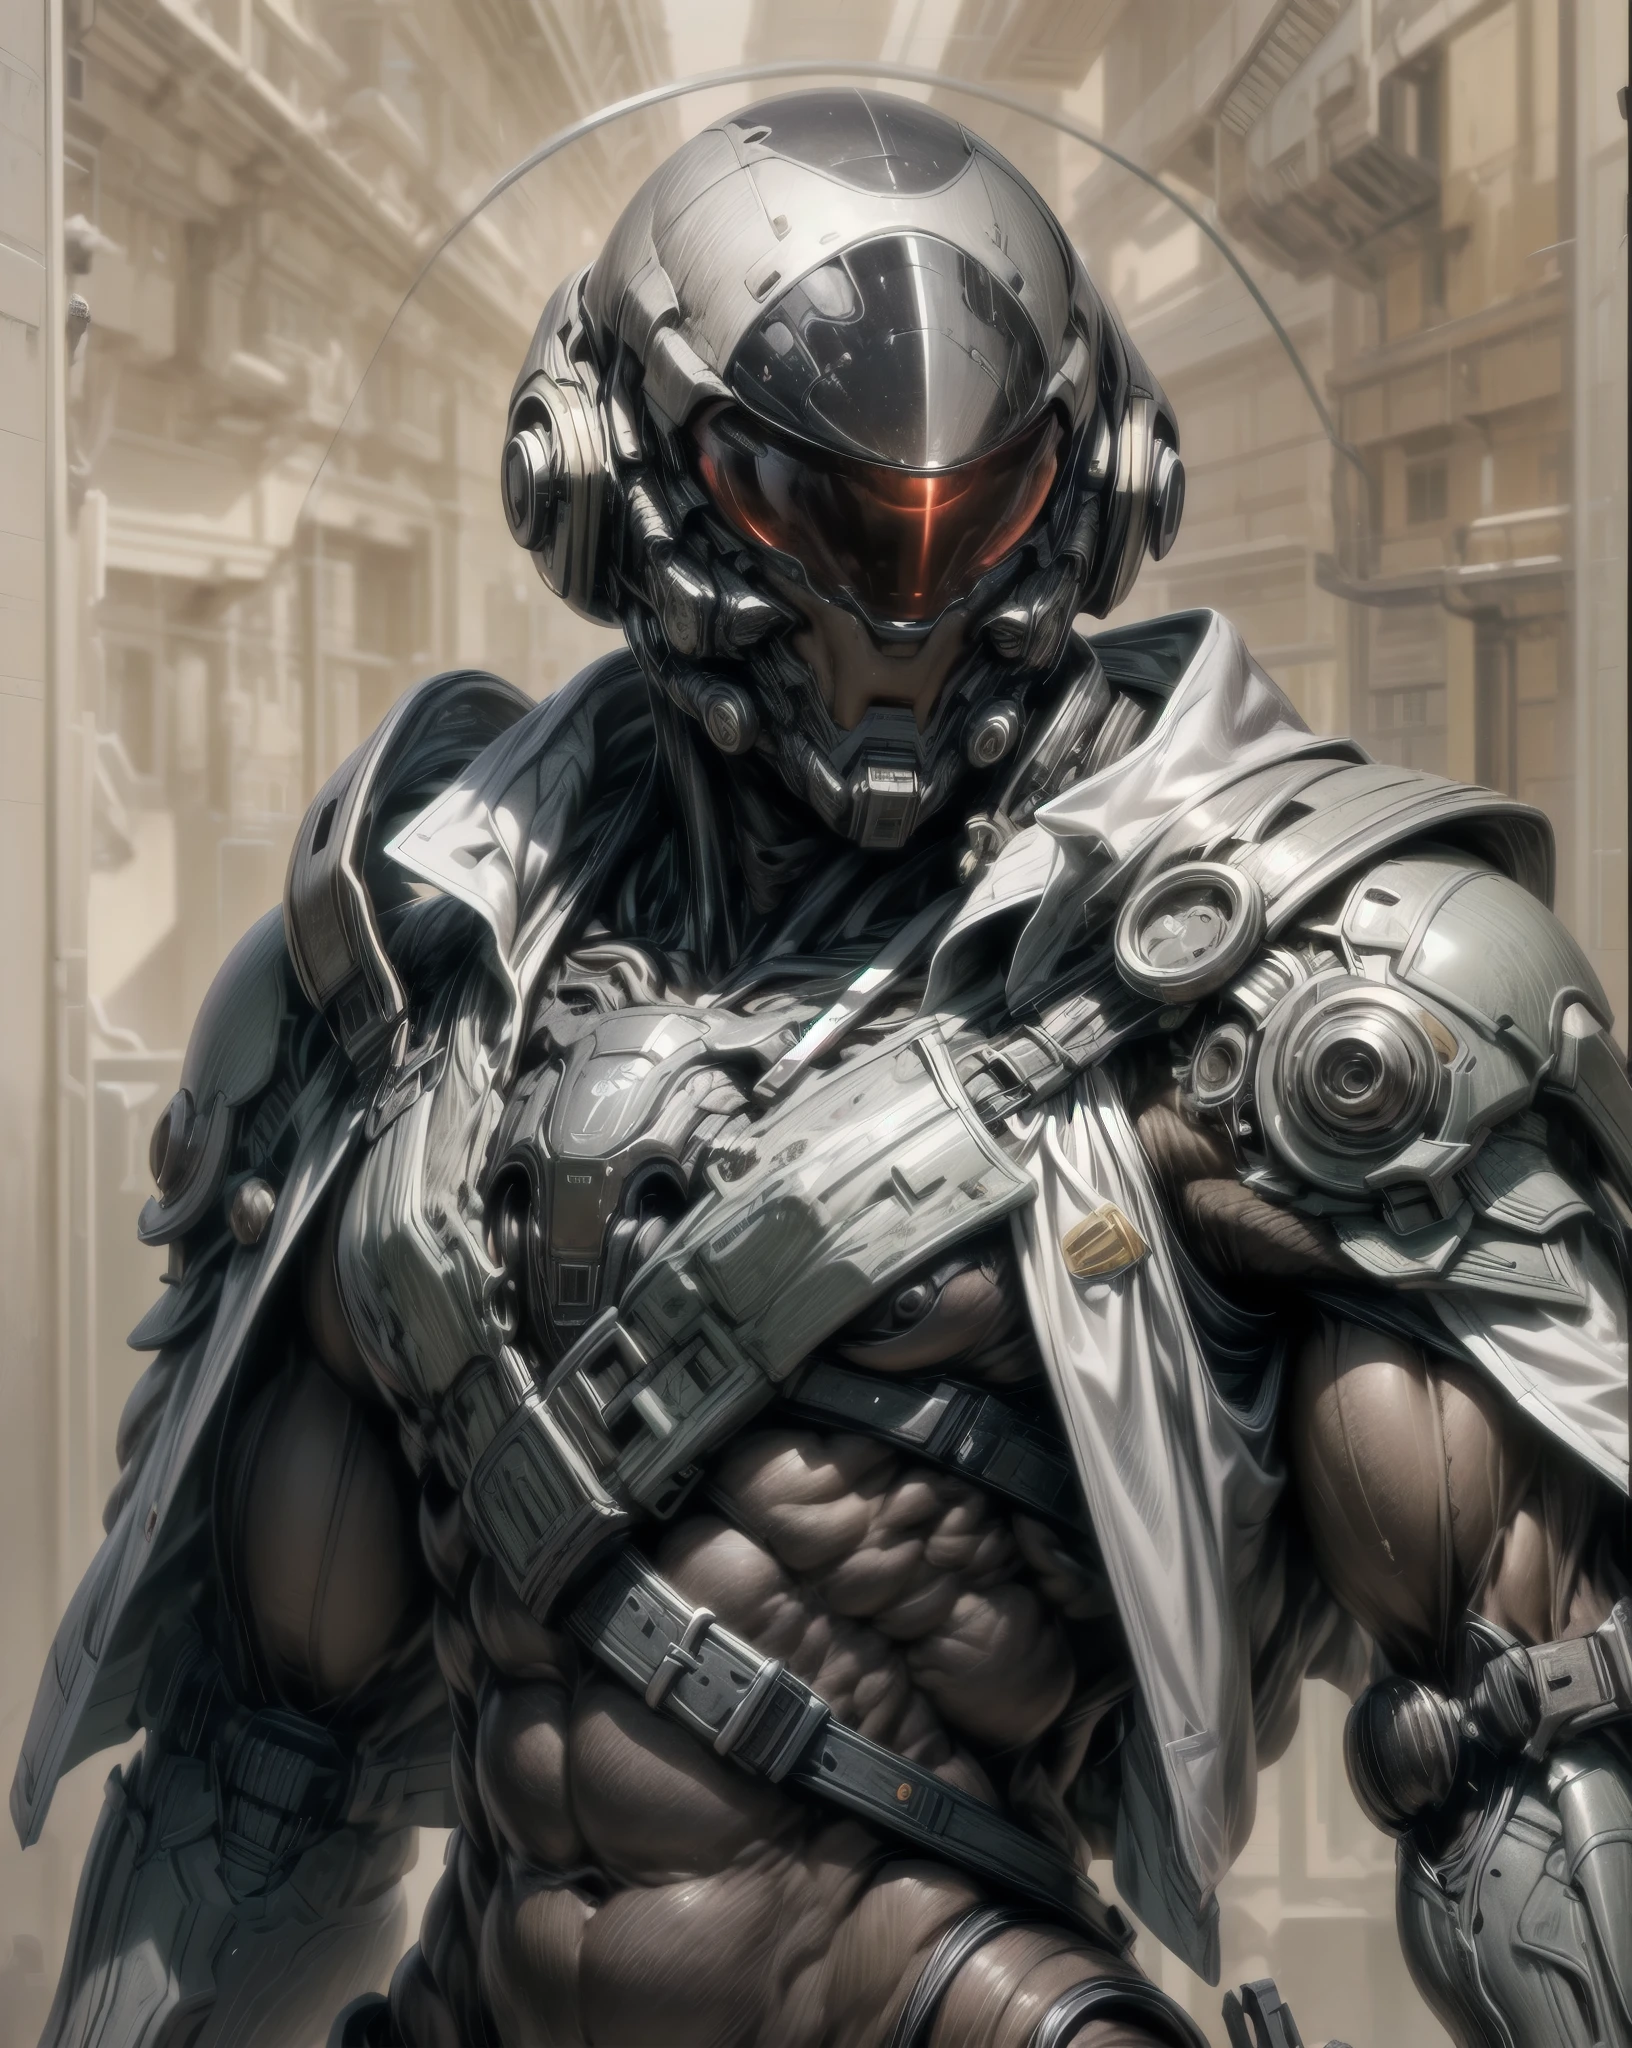 (((epic and visually stunning complex digital anime masterpiece:1.6, elegant decorated tactical military cyborg:1.3, ((gorgeous feminine male physique:1.3, graceful:1.4)) space soldier:1.3))), (((heavily muscled masculine chest:1.4, chiseled abs:1.4, heavily toned:1.4, slim yet muscular:1.3))), (((complex and beautiful:1.3, tactical:1.3, stunning scifi fantasy style:1.5, beautiful scifi style mechanical helmet:1.5, polarized visor:1.5))), (((elegant tactical double breasted trench coat:1.5, sleek exoskeleton:1.3))), (((form fitted armor plating:1.3, super sleek sensually revealing under suit:1.5, waist and thighs exposed:1.5)), ((flamboyant feminine essence:1.4, heavy mechanical gothic aesthetic:1.4)), ((androgynous body build)), (((toned yet heavily muscled gorgeous femboy physique:1.4, gorgeous perfectly defined muscles:1.4, toned sleek mechanical arms and legs:1.4, thick well rounded thighs:1.5, mechanical muscles))), ((((depth of field, cinematic lighting, chromatic aberration, ray tracing, UHD, masterpiece, top of head covered, super detail, high details, high quality, award winning, 8k, highres)))):1.6, (((dieselpunk, decopunk, artificial muscle))):1.6, (((beautifully engraved artdeco scifi style design:1.4)))